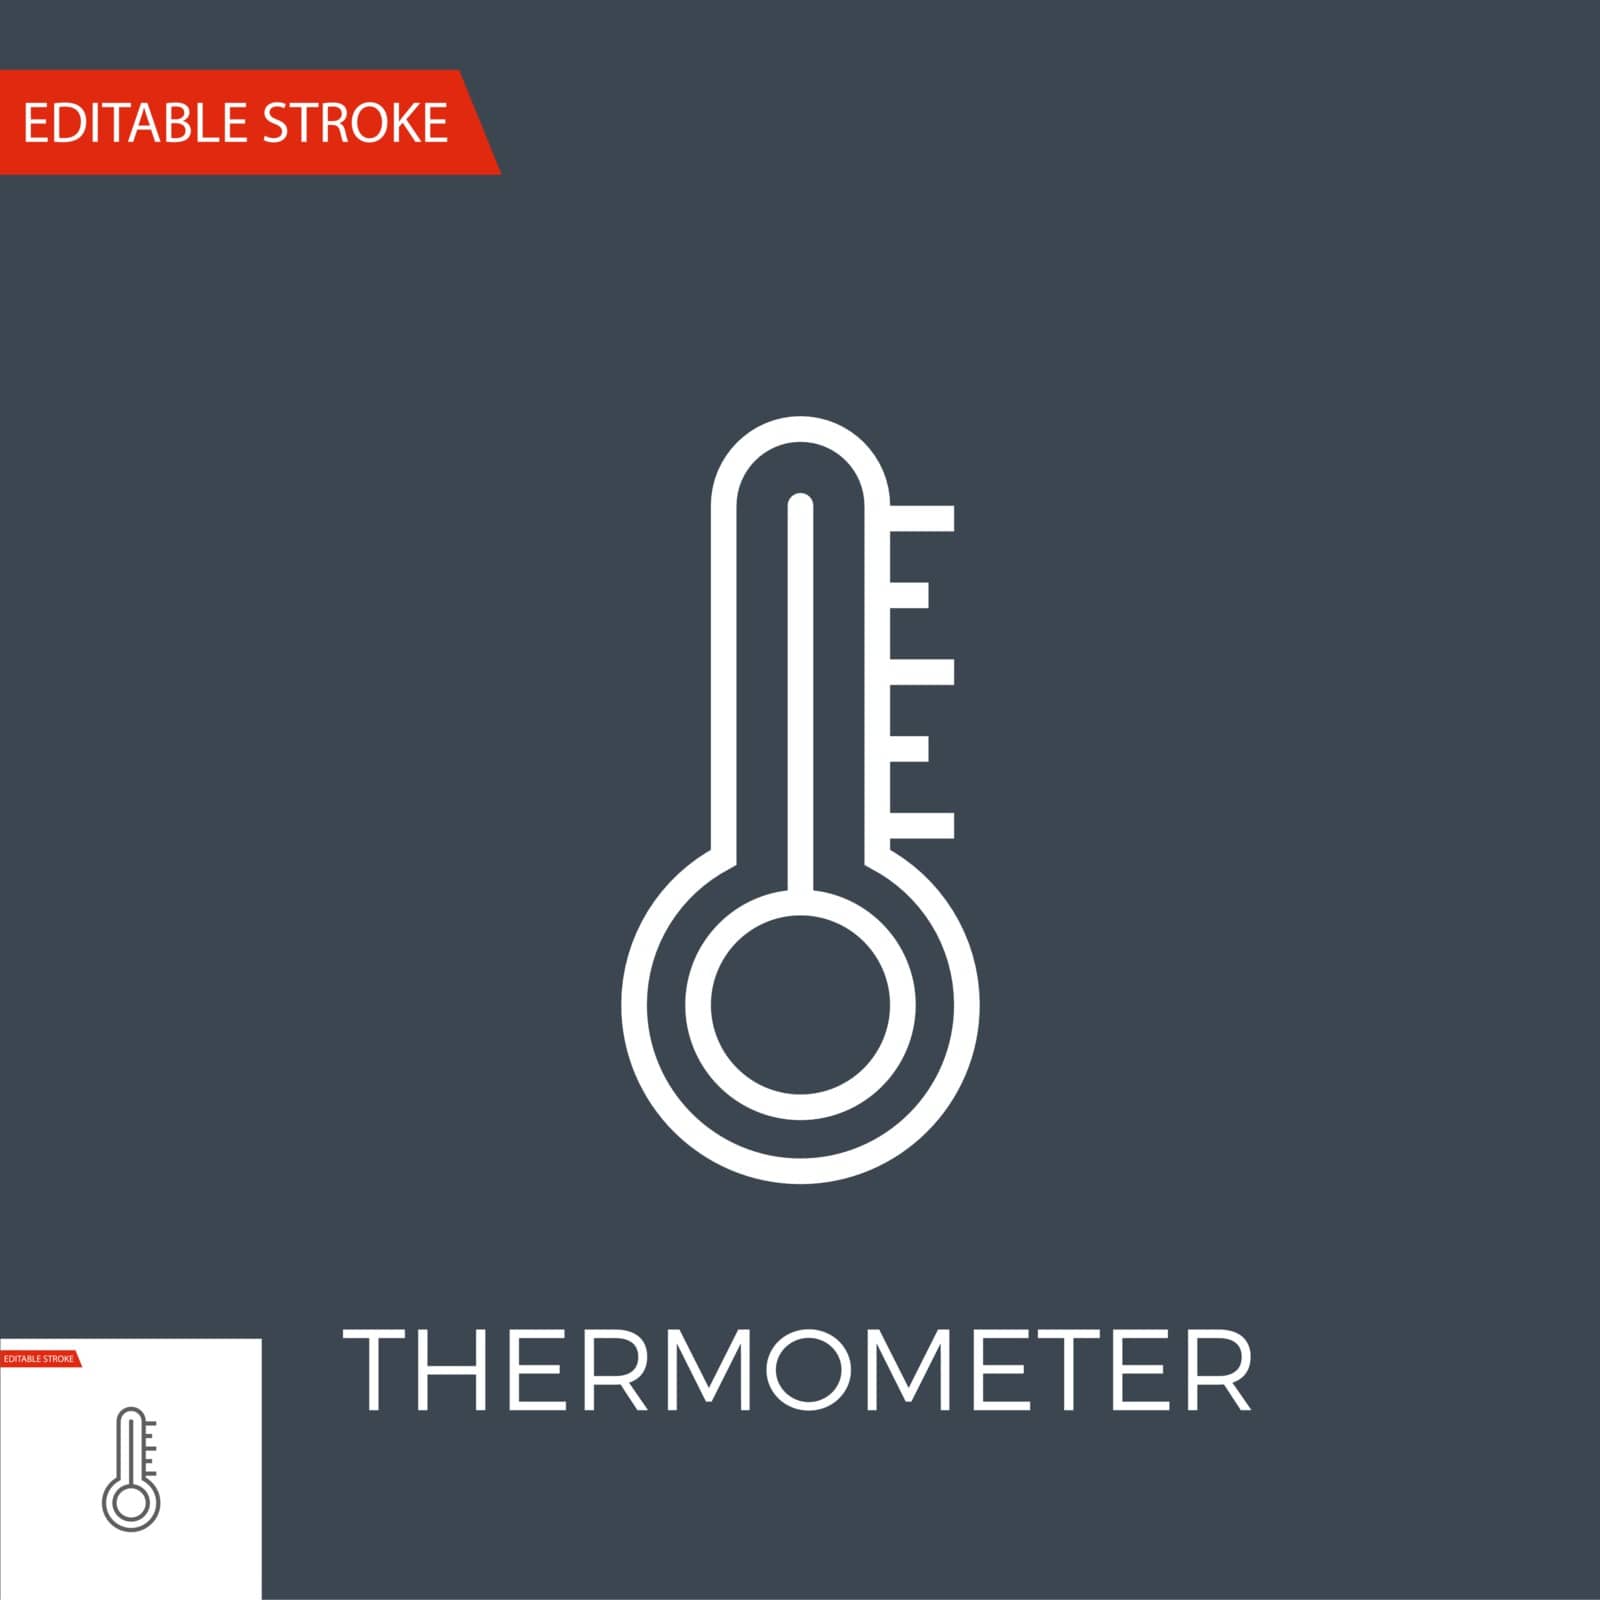 Thermometer Thin Line Vector Icon. Flat Icon Isolated on the Black Background. Editable Stroke EPS file. Vector illustration.